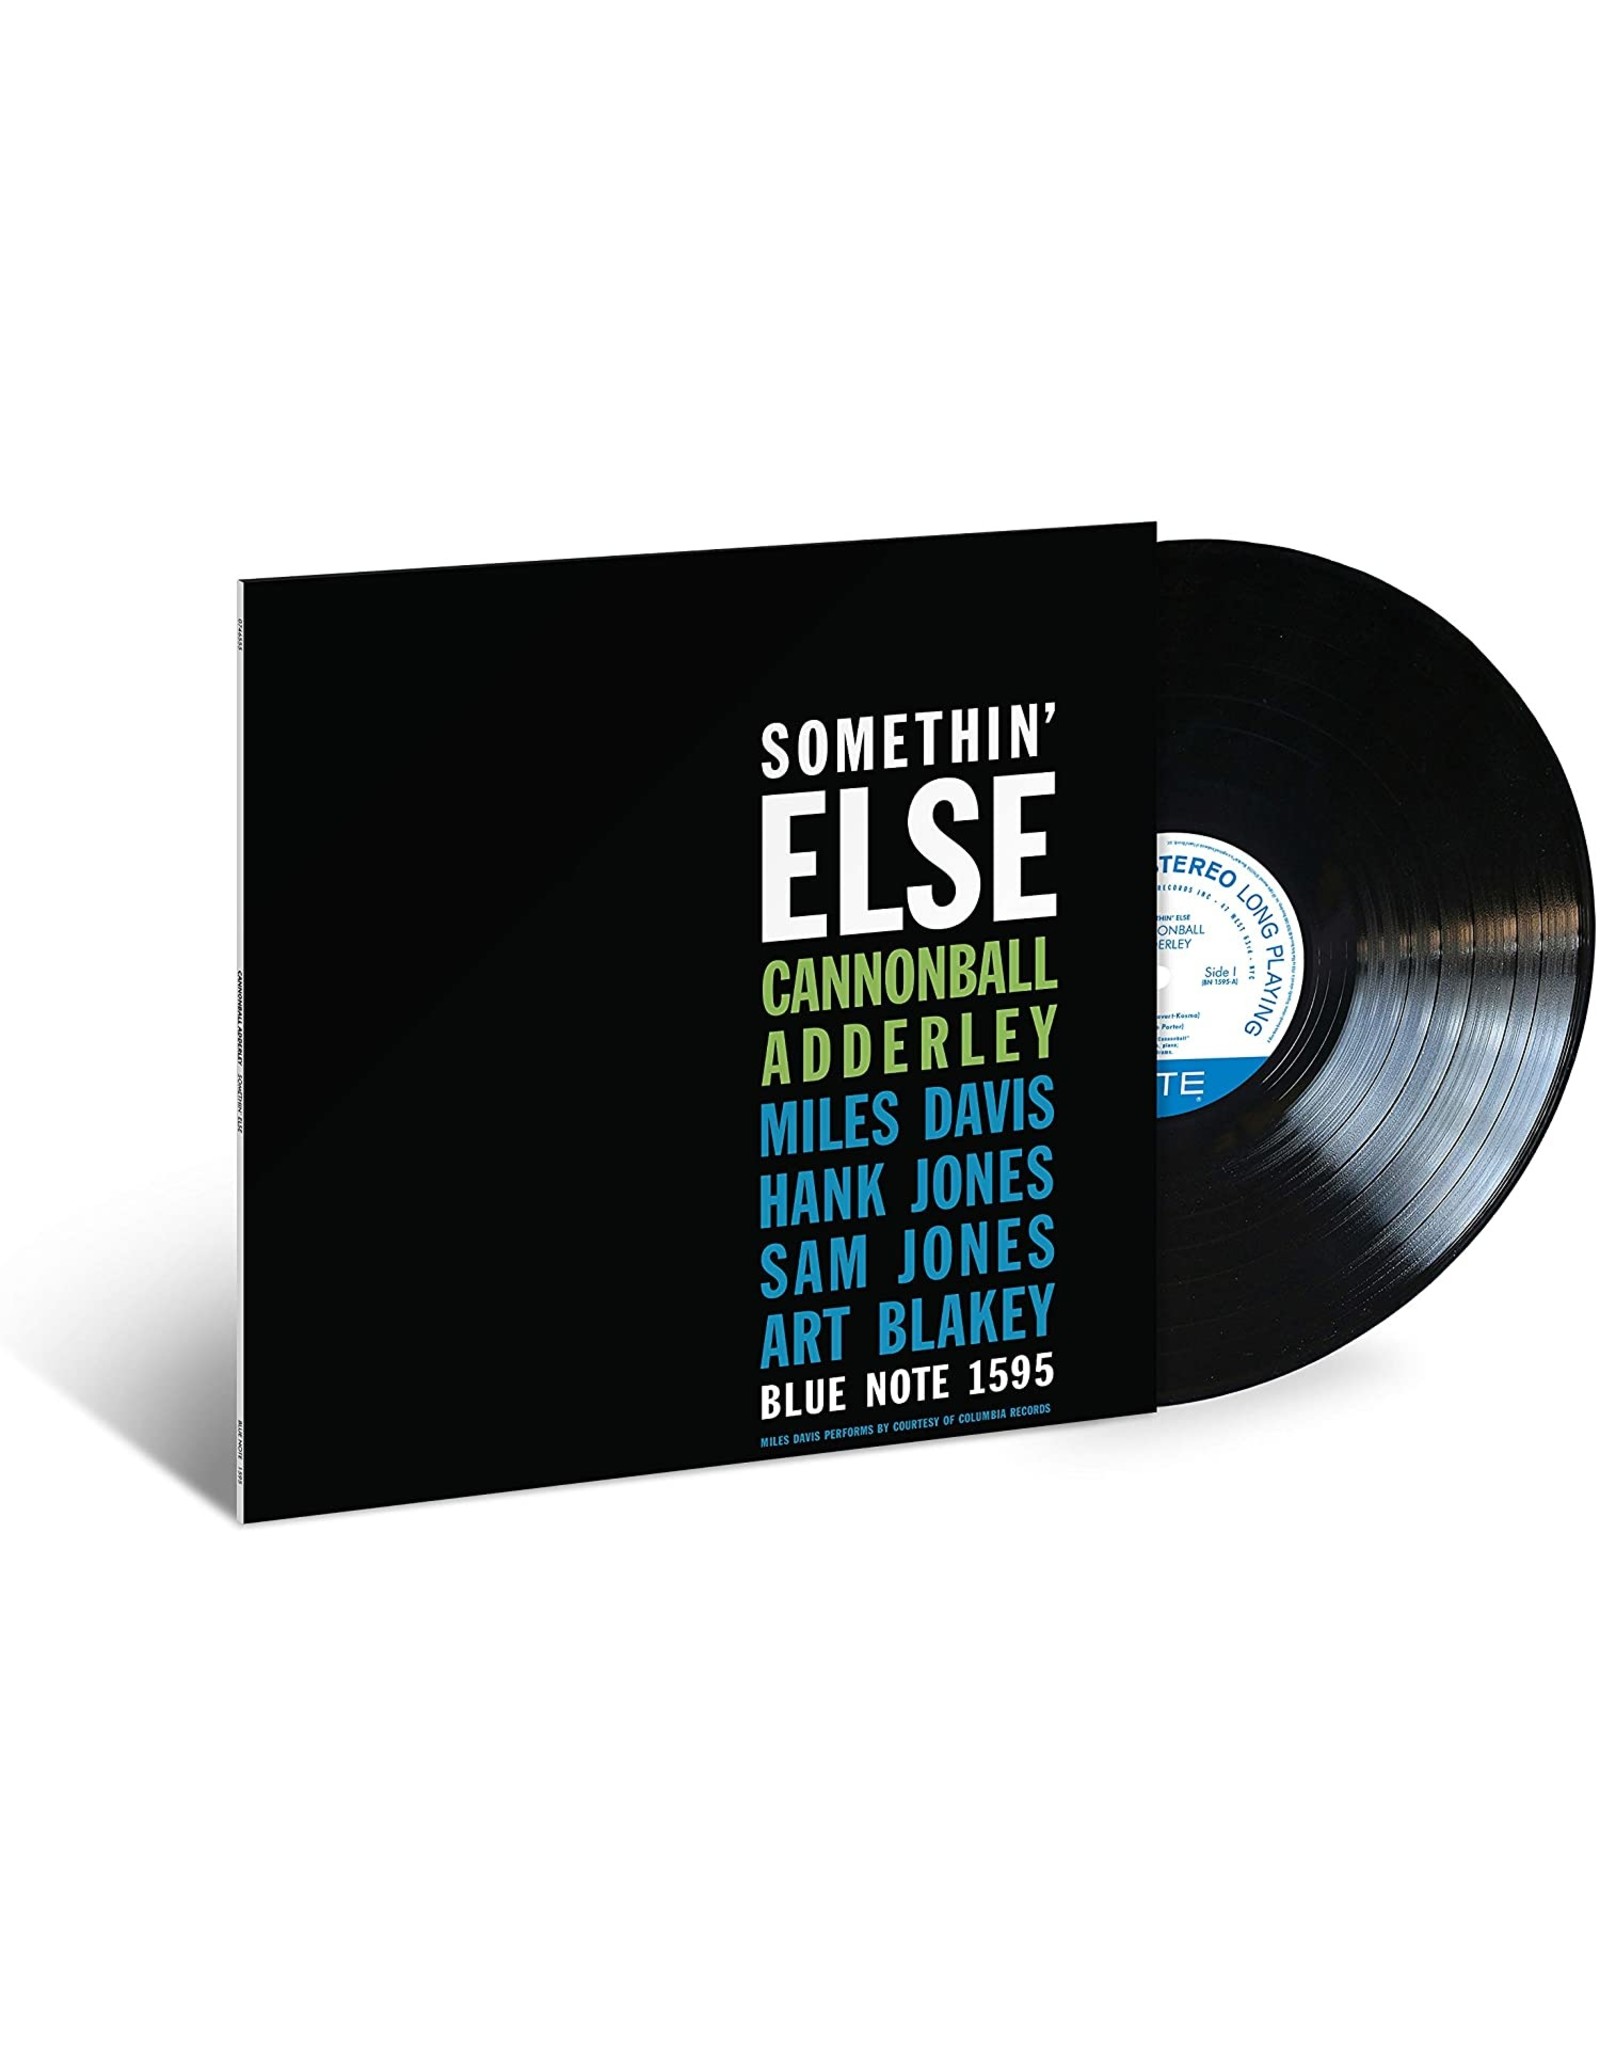 Cannonball Adderley - Somethin' Else (Blue Note Classic)